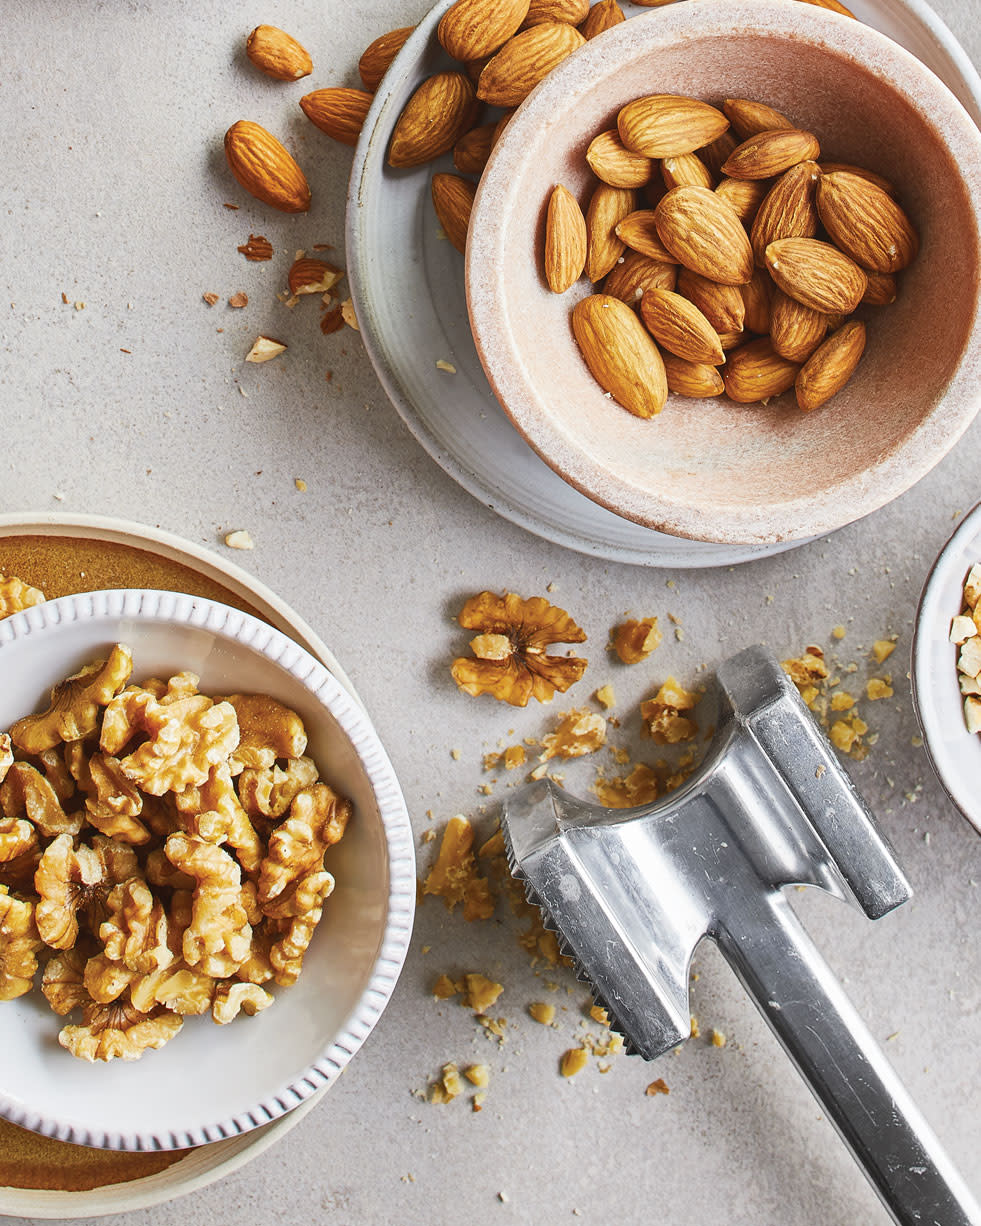 A Quick Trick for Chopping Nuts without a knife